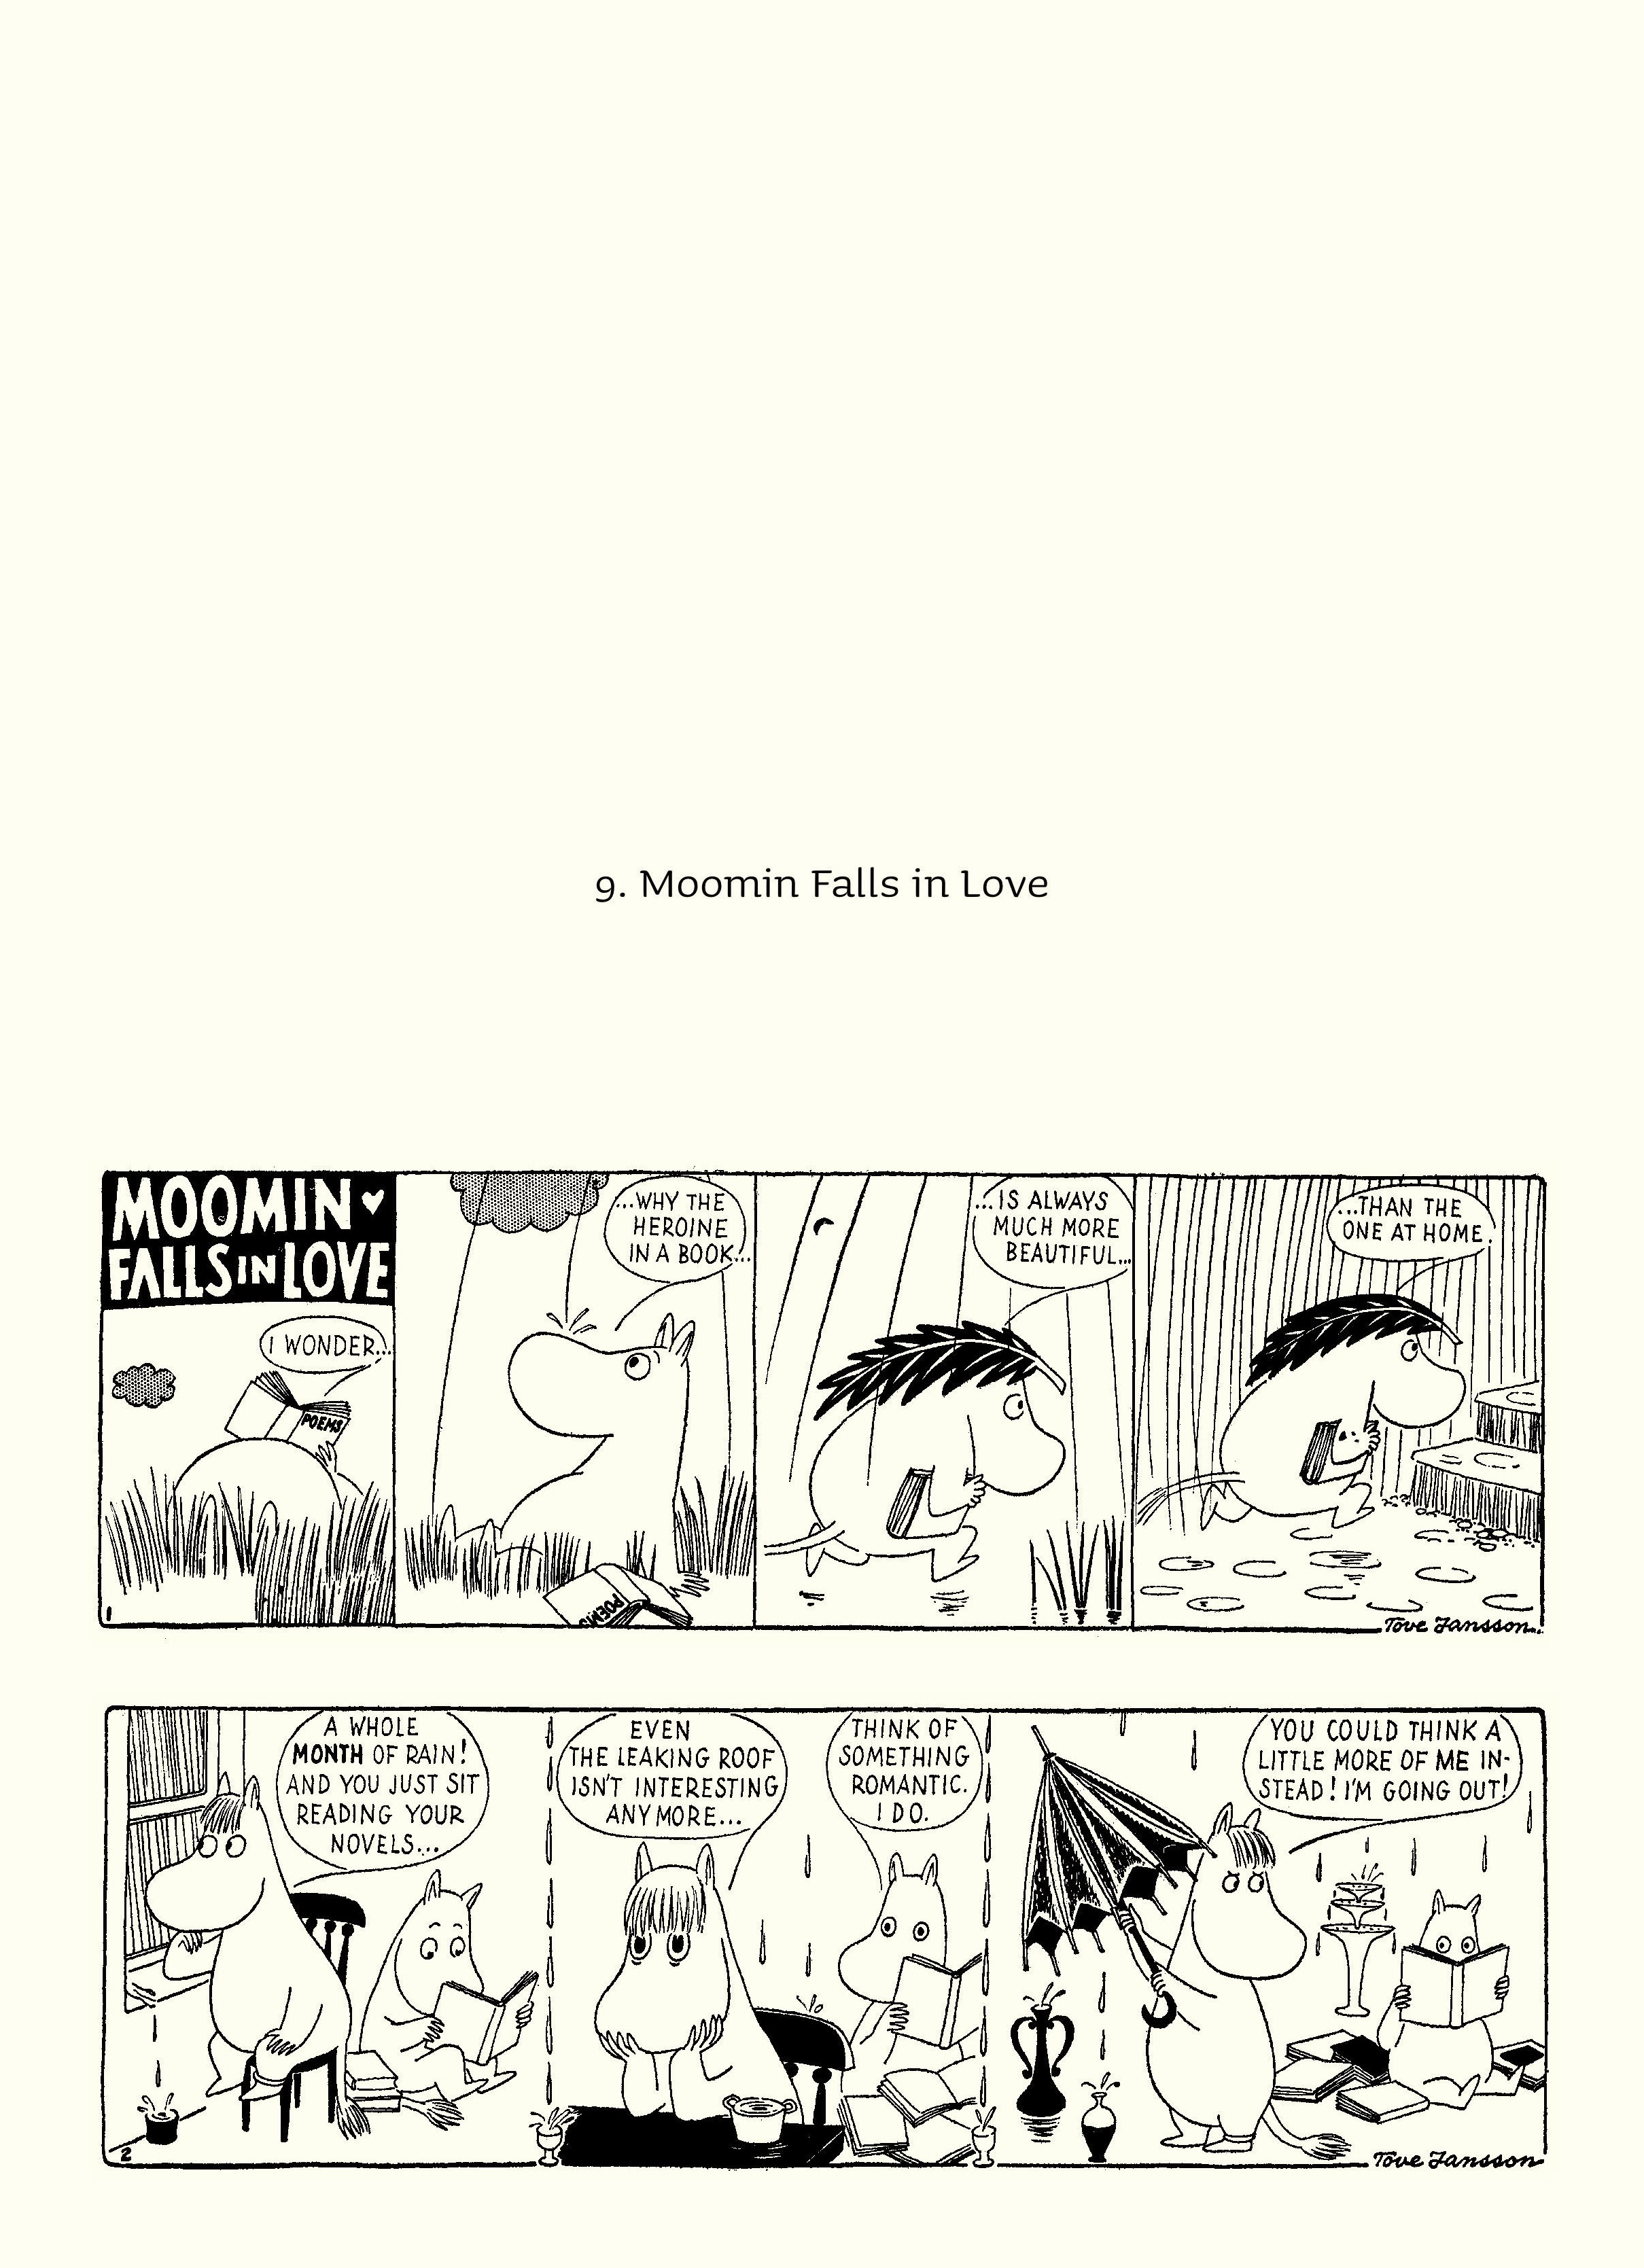 Read online Moomin: The Complete Tove Jansson Comic Strip comic -  Issue # TPB 3 - 6